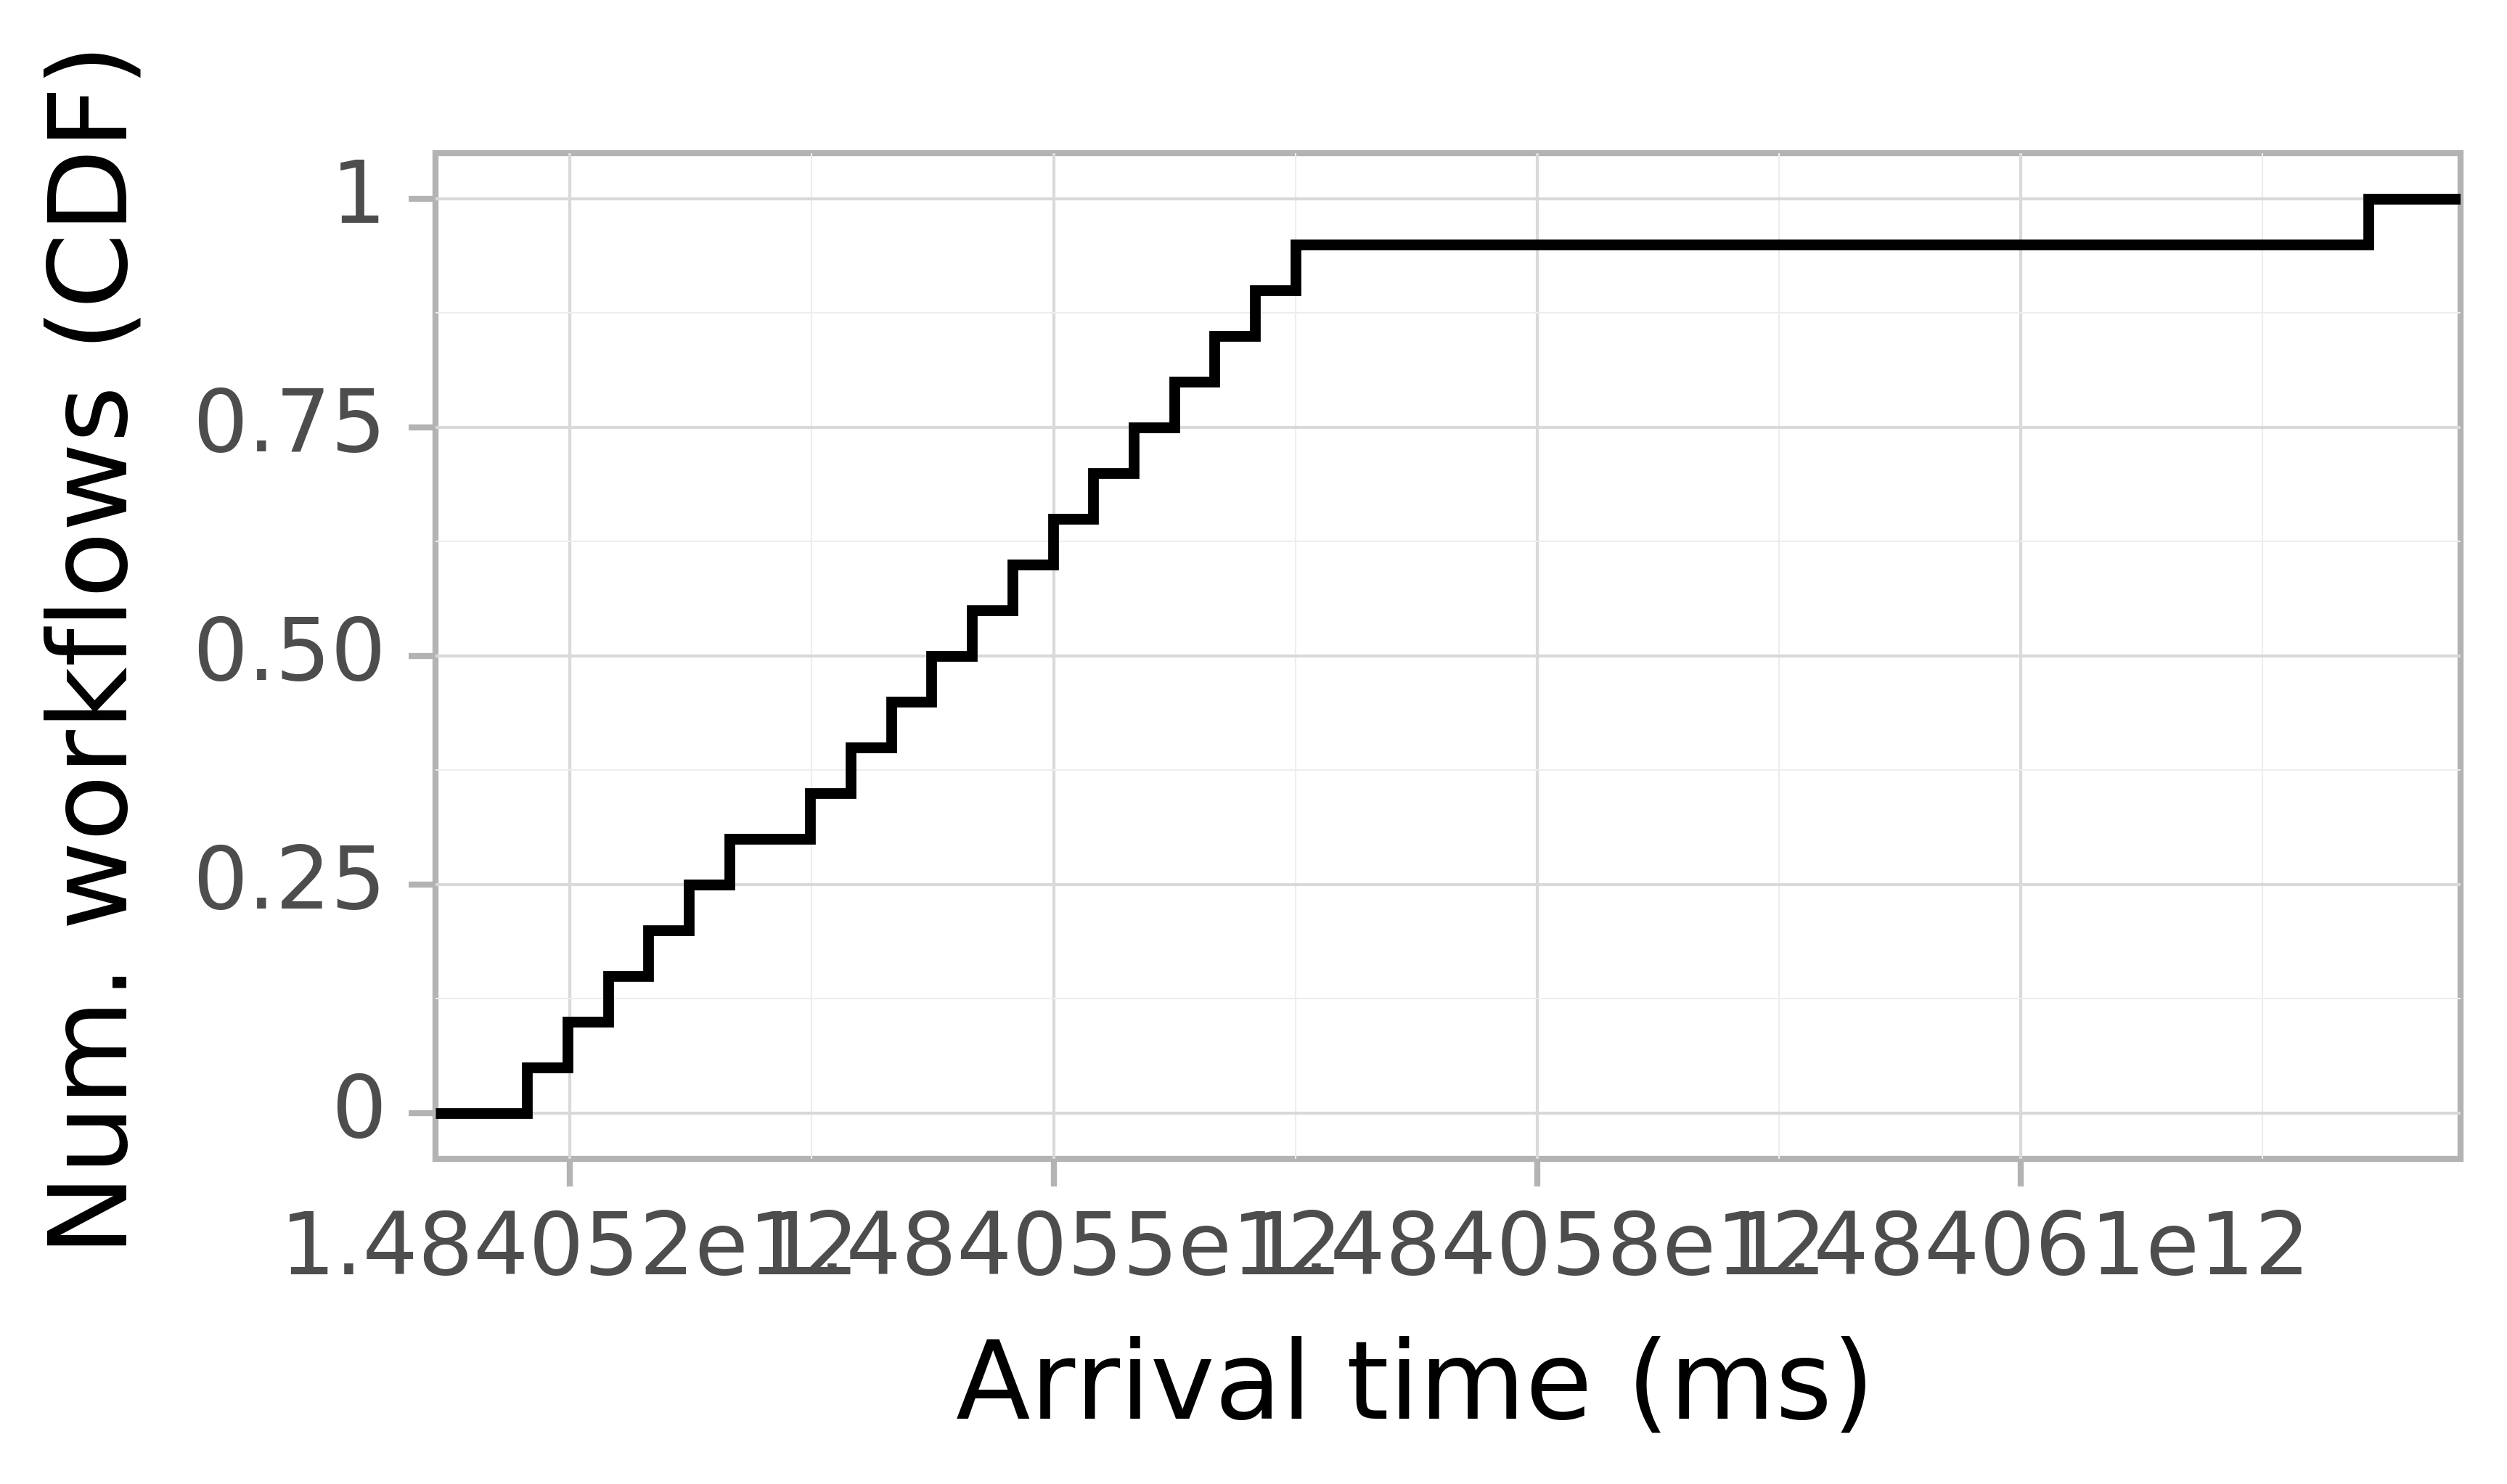 Job arrival CDF graph for the askalon-new_ee5 trace.